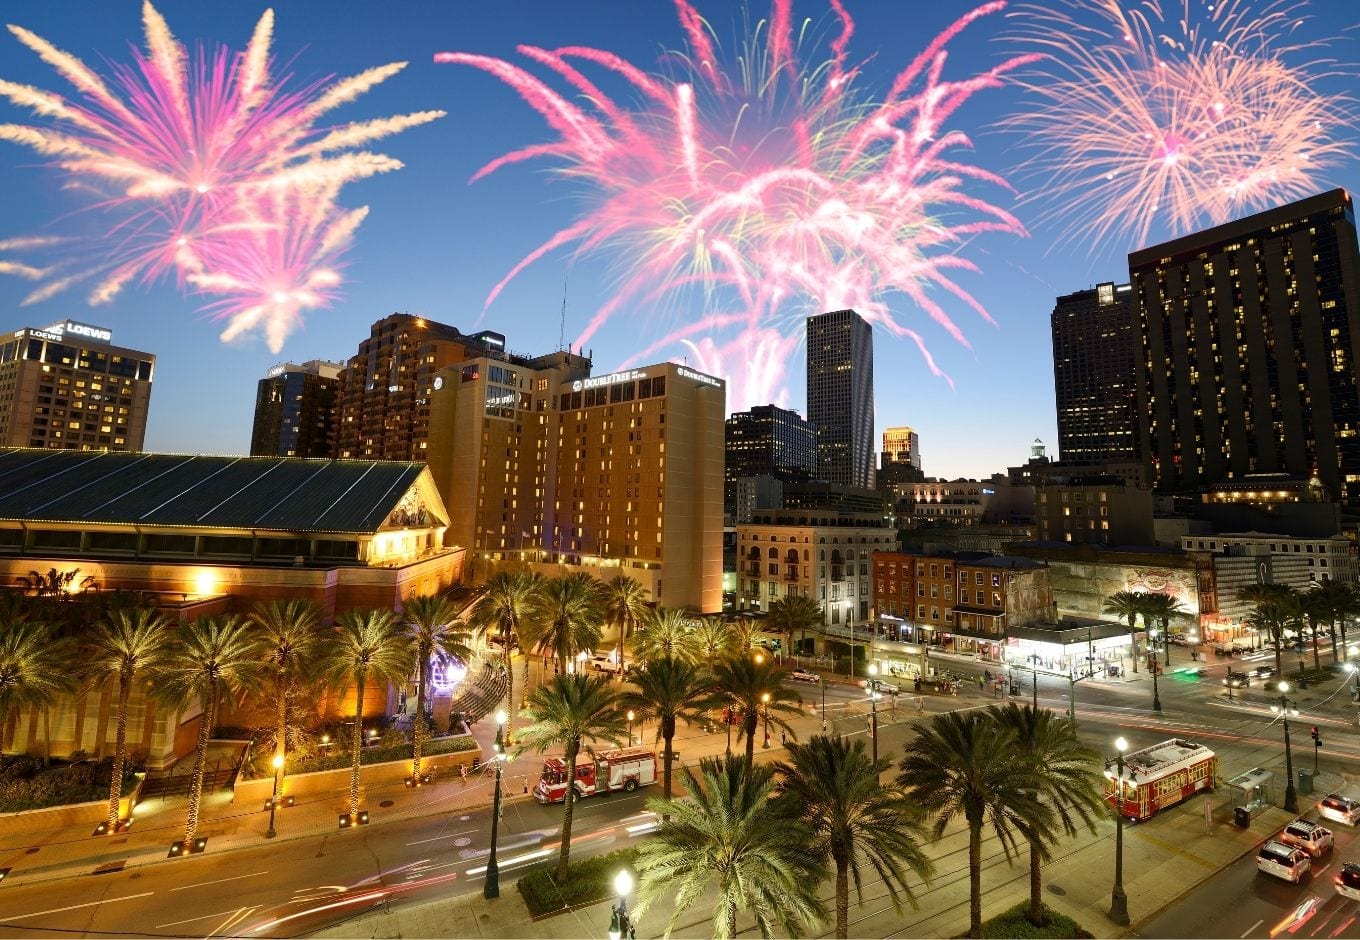 Fireworks in New Orleans, Louisiana.